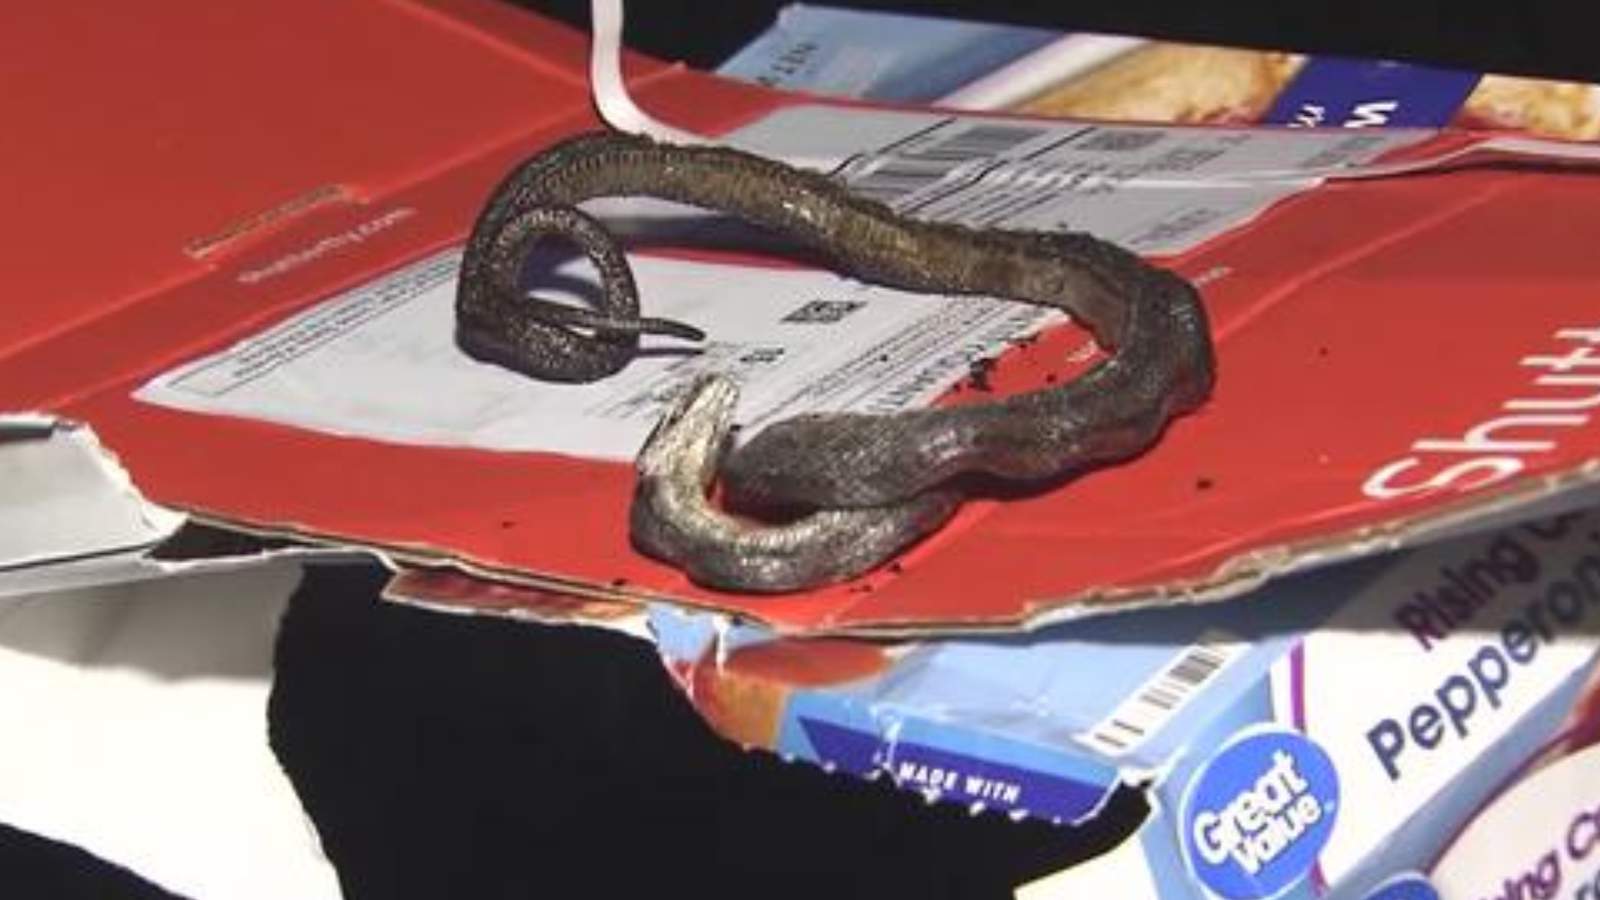 A family thought they were just baking a pizza. Then they found a snake inside their oven